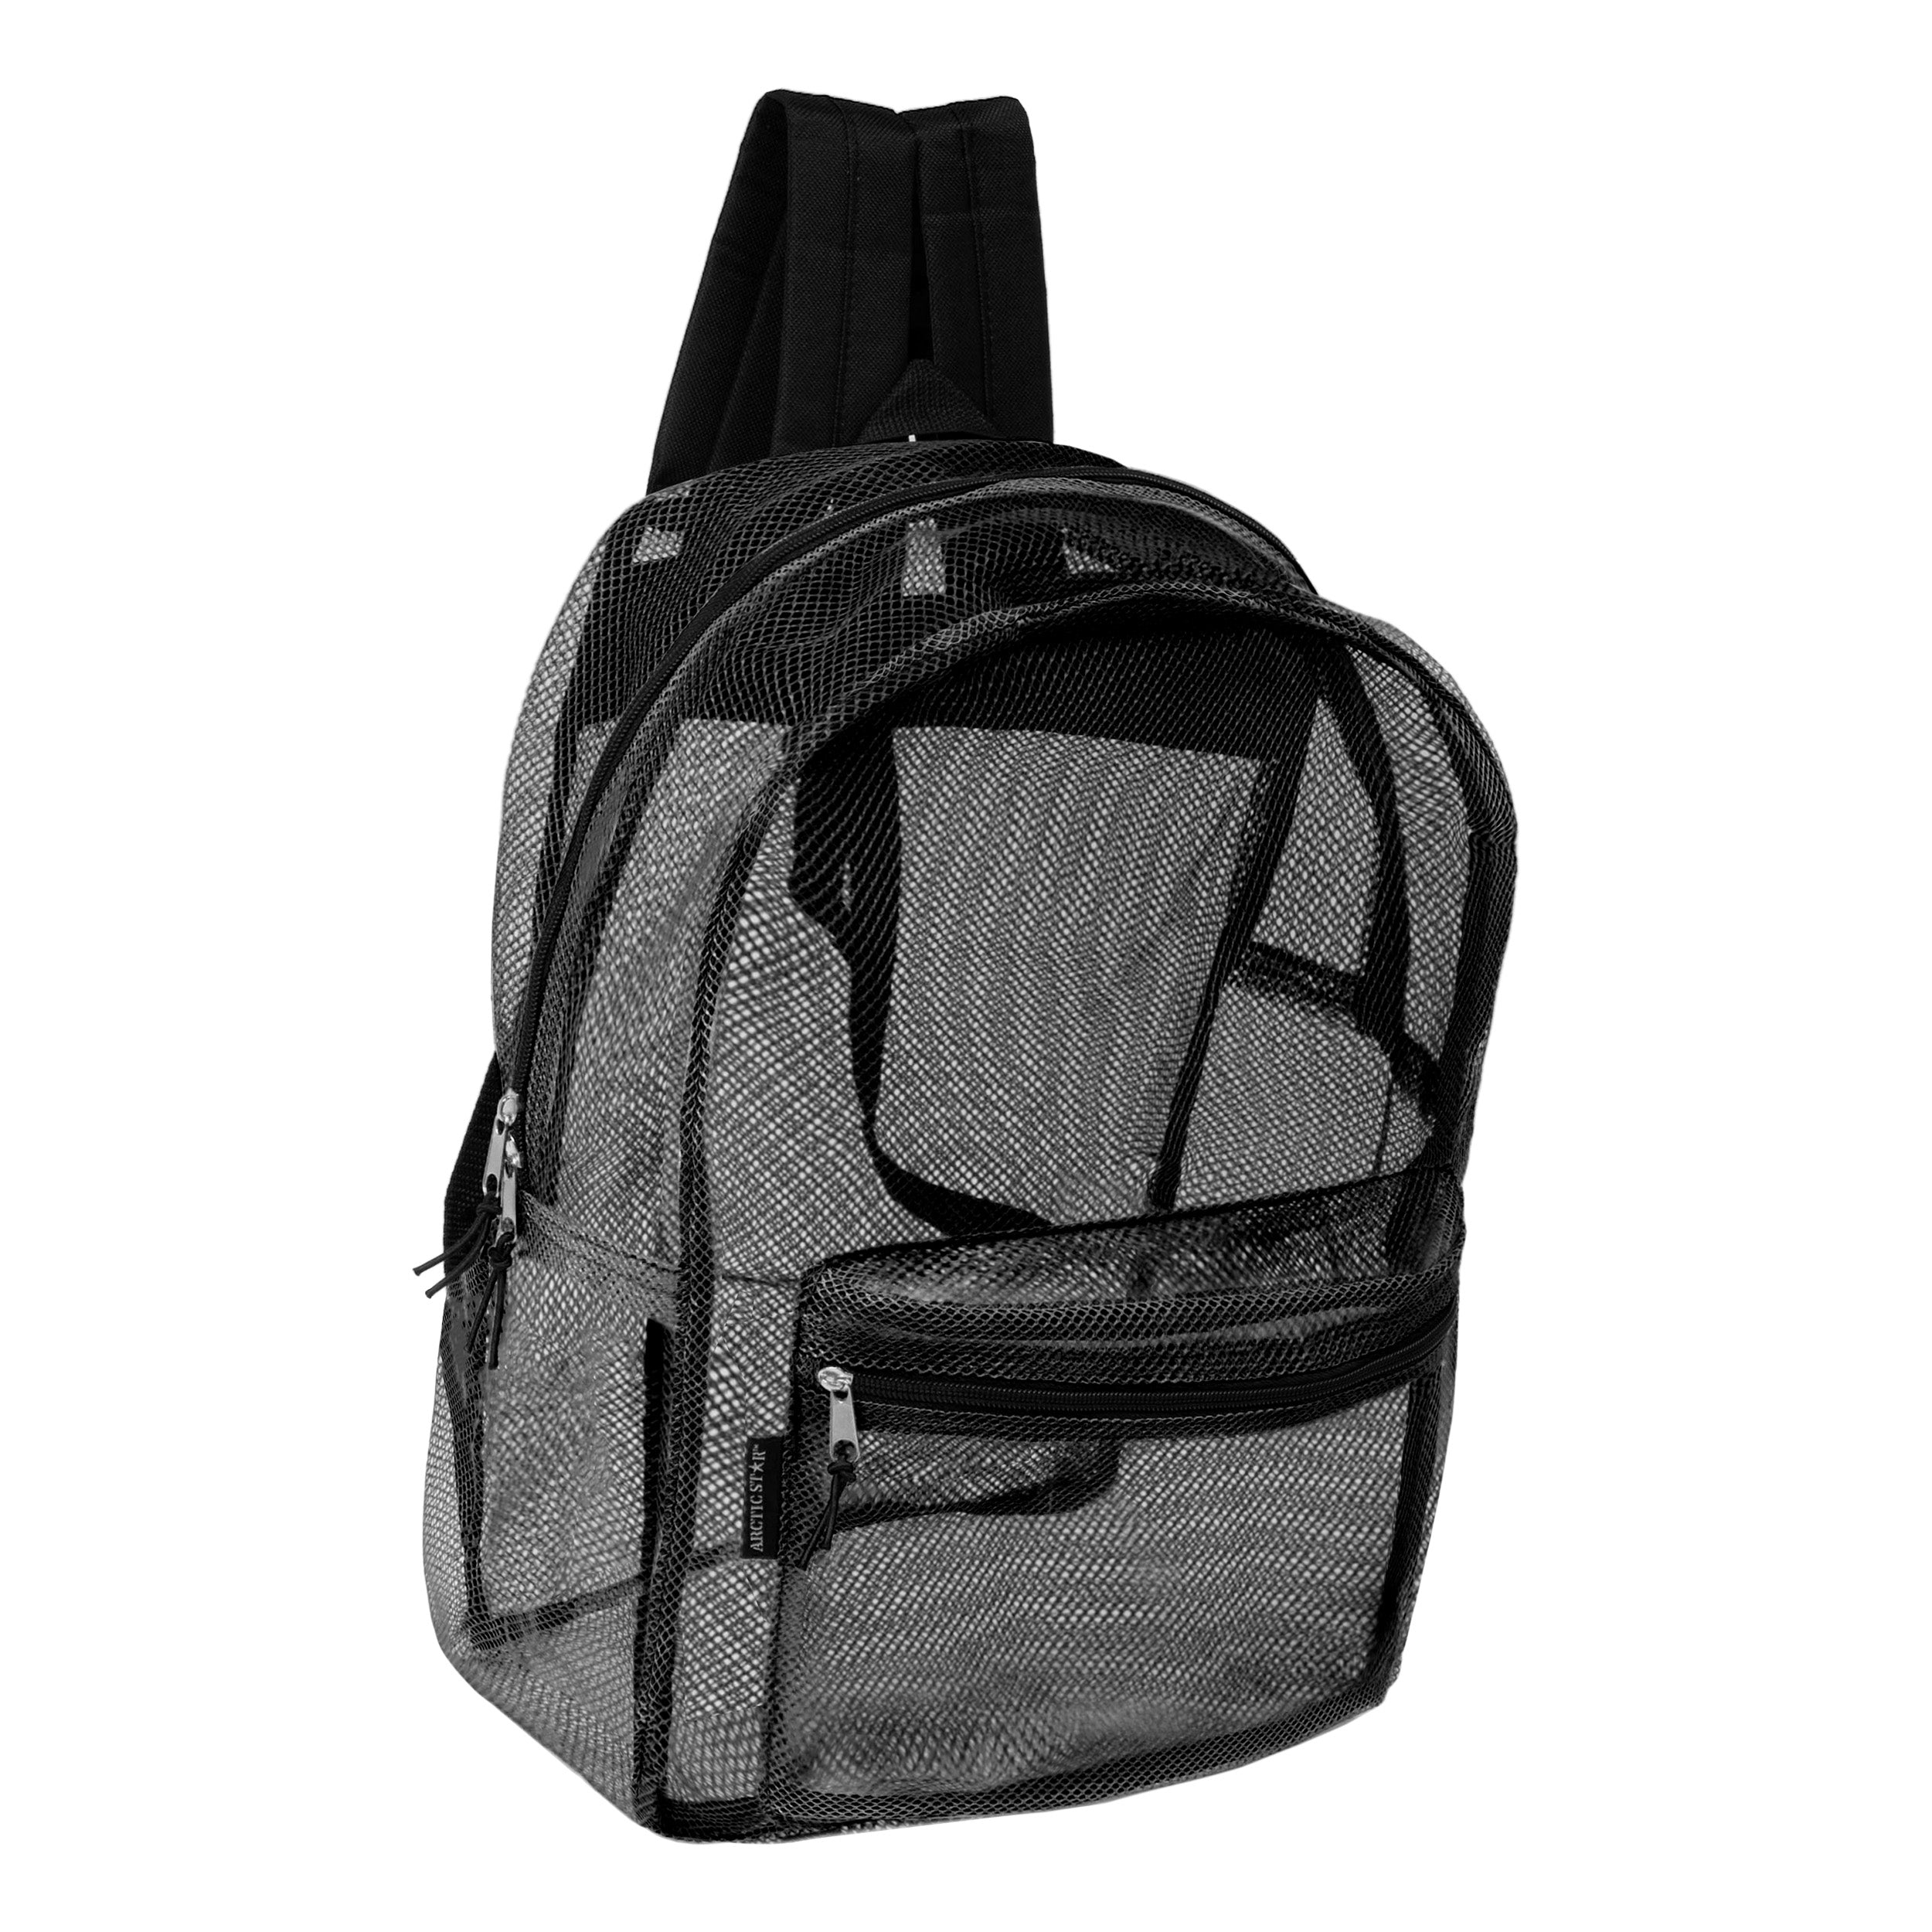 Mesh Wholesale Backpacks 6 Assorted Colors Case of 24 Bookbags